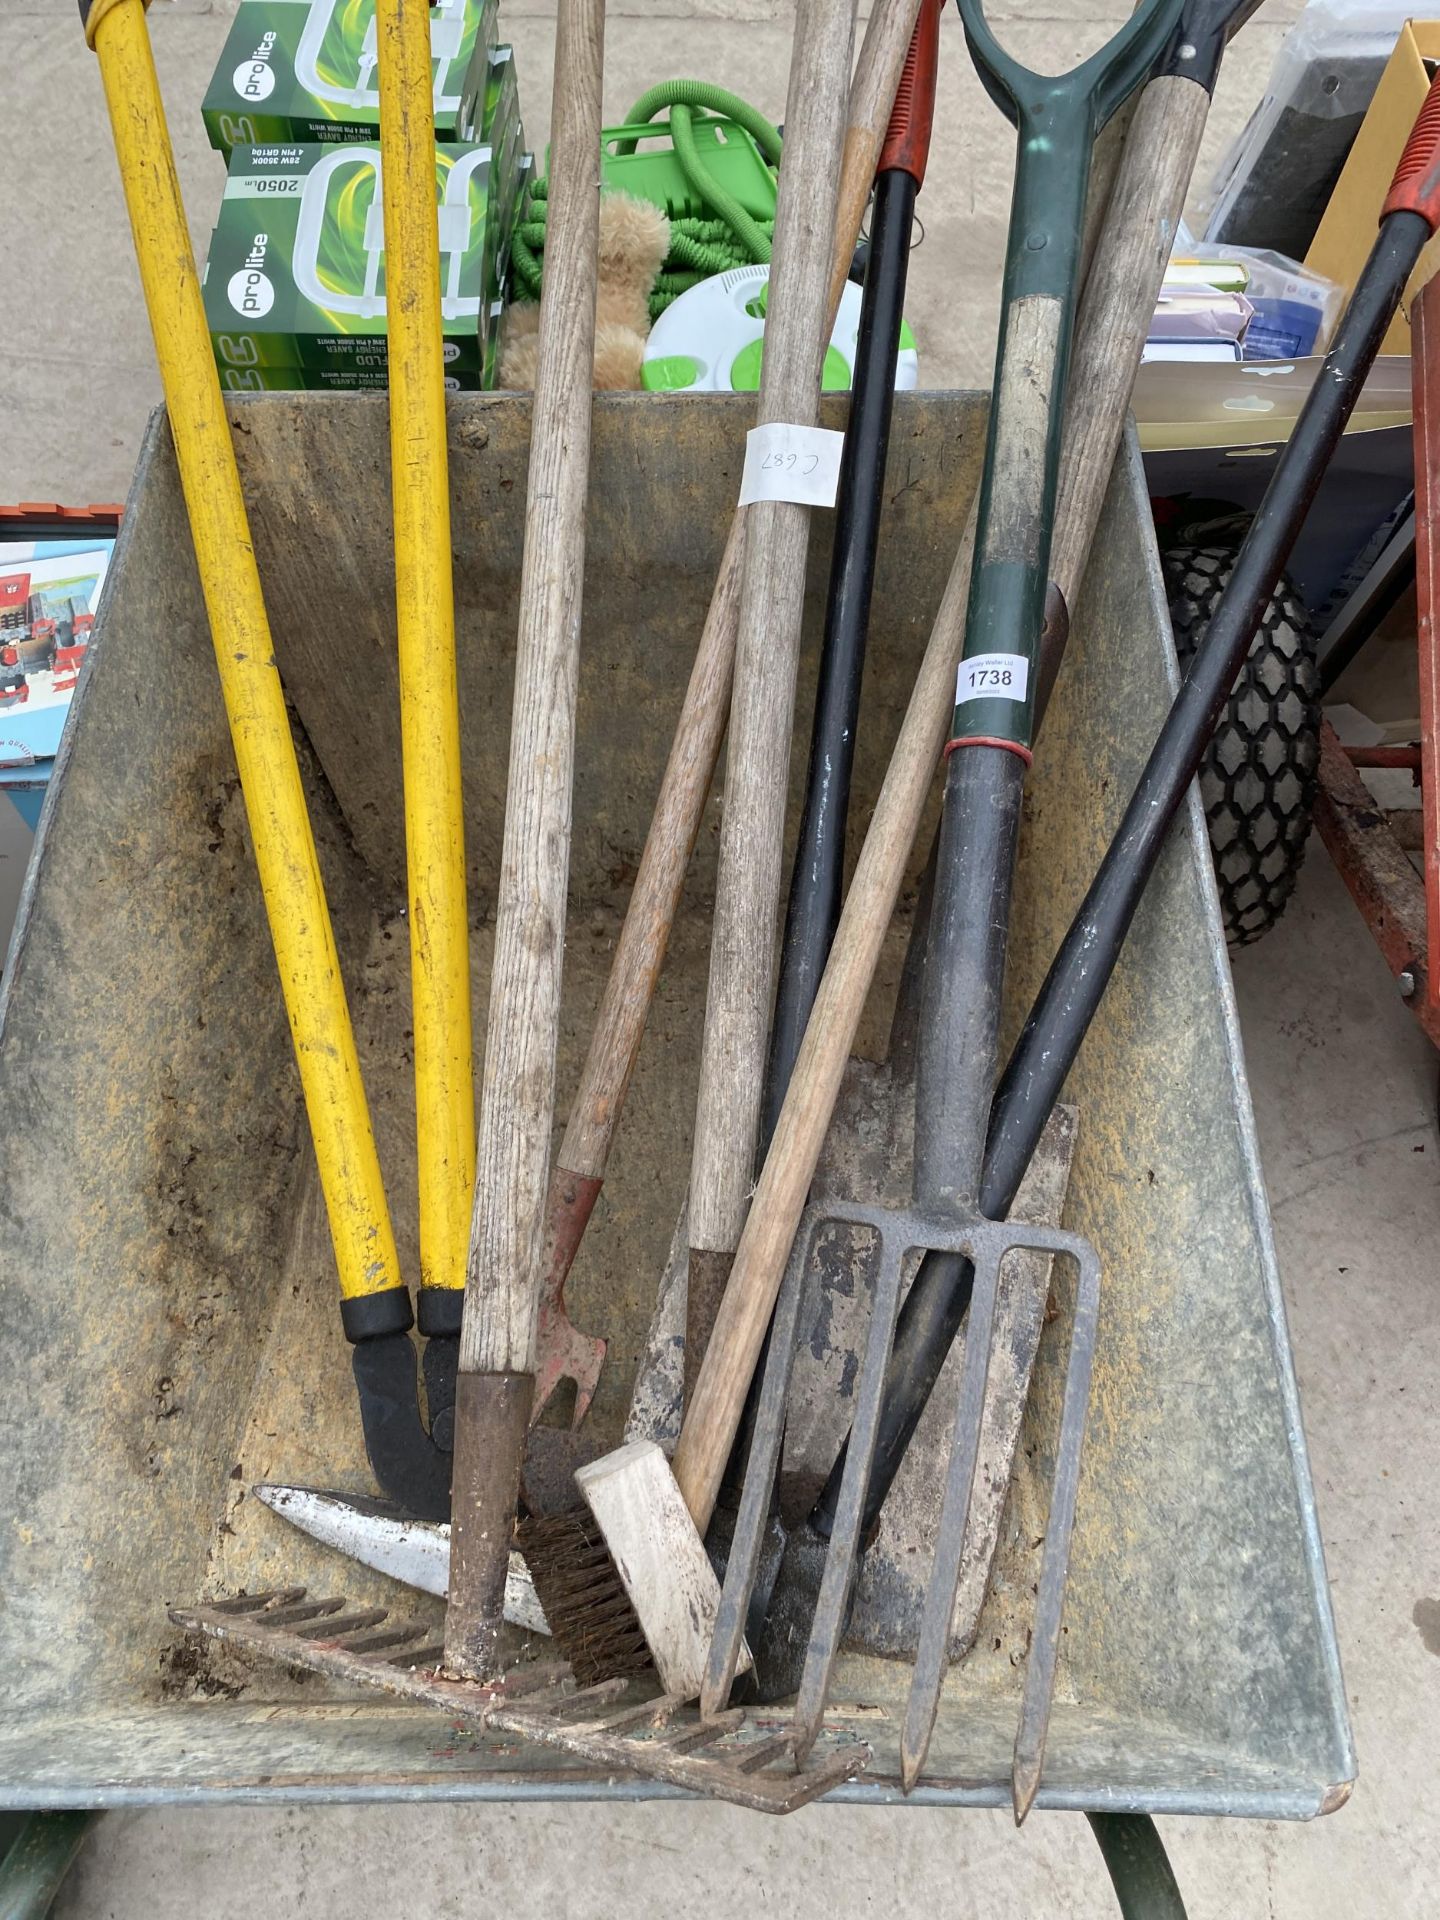 A METAL WHEEL BARROW AND AN ASSORTMENT OF GARDEN TOOLS - Image 2 of 3